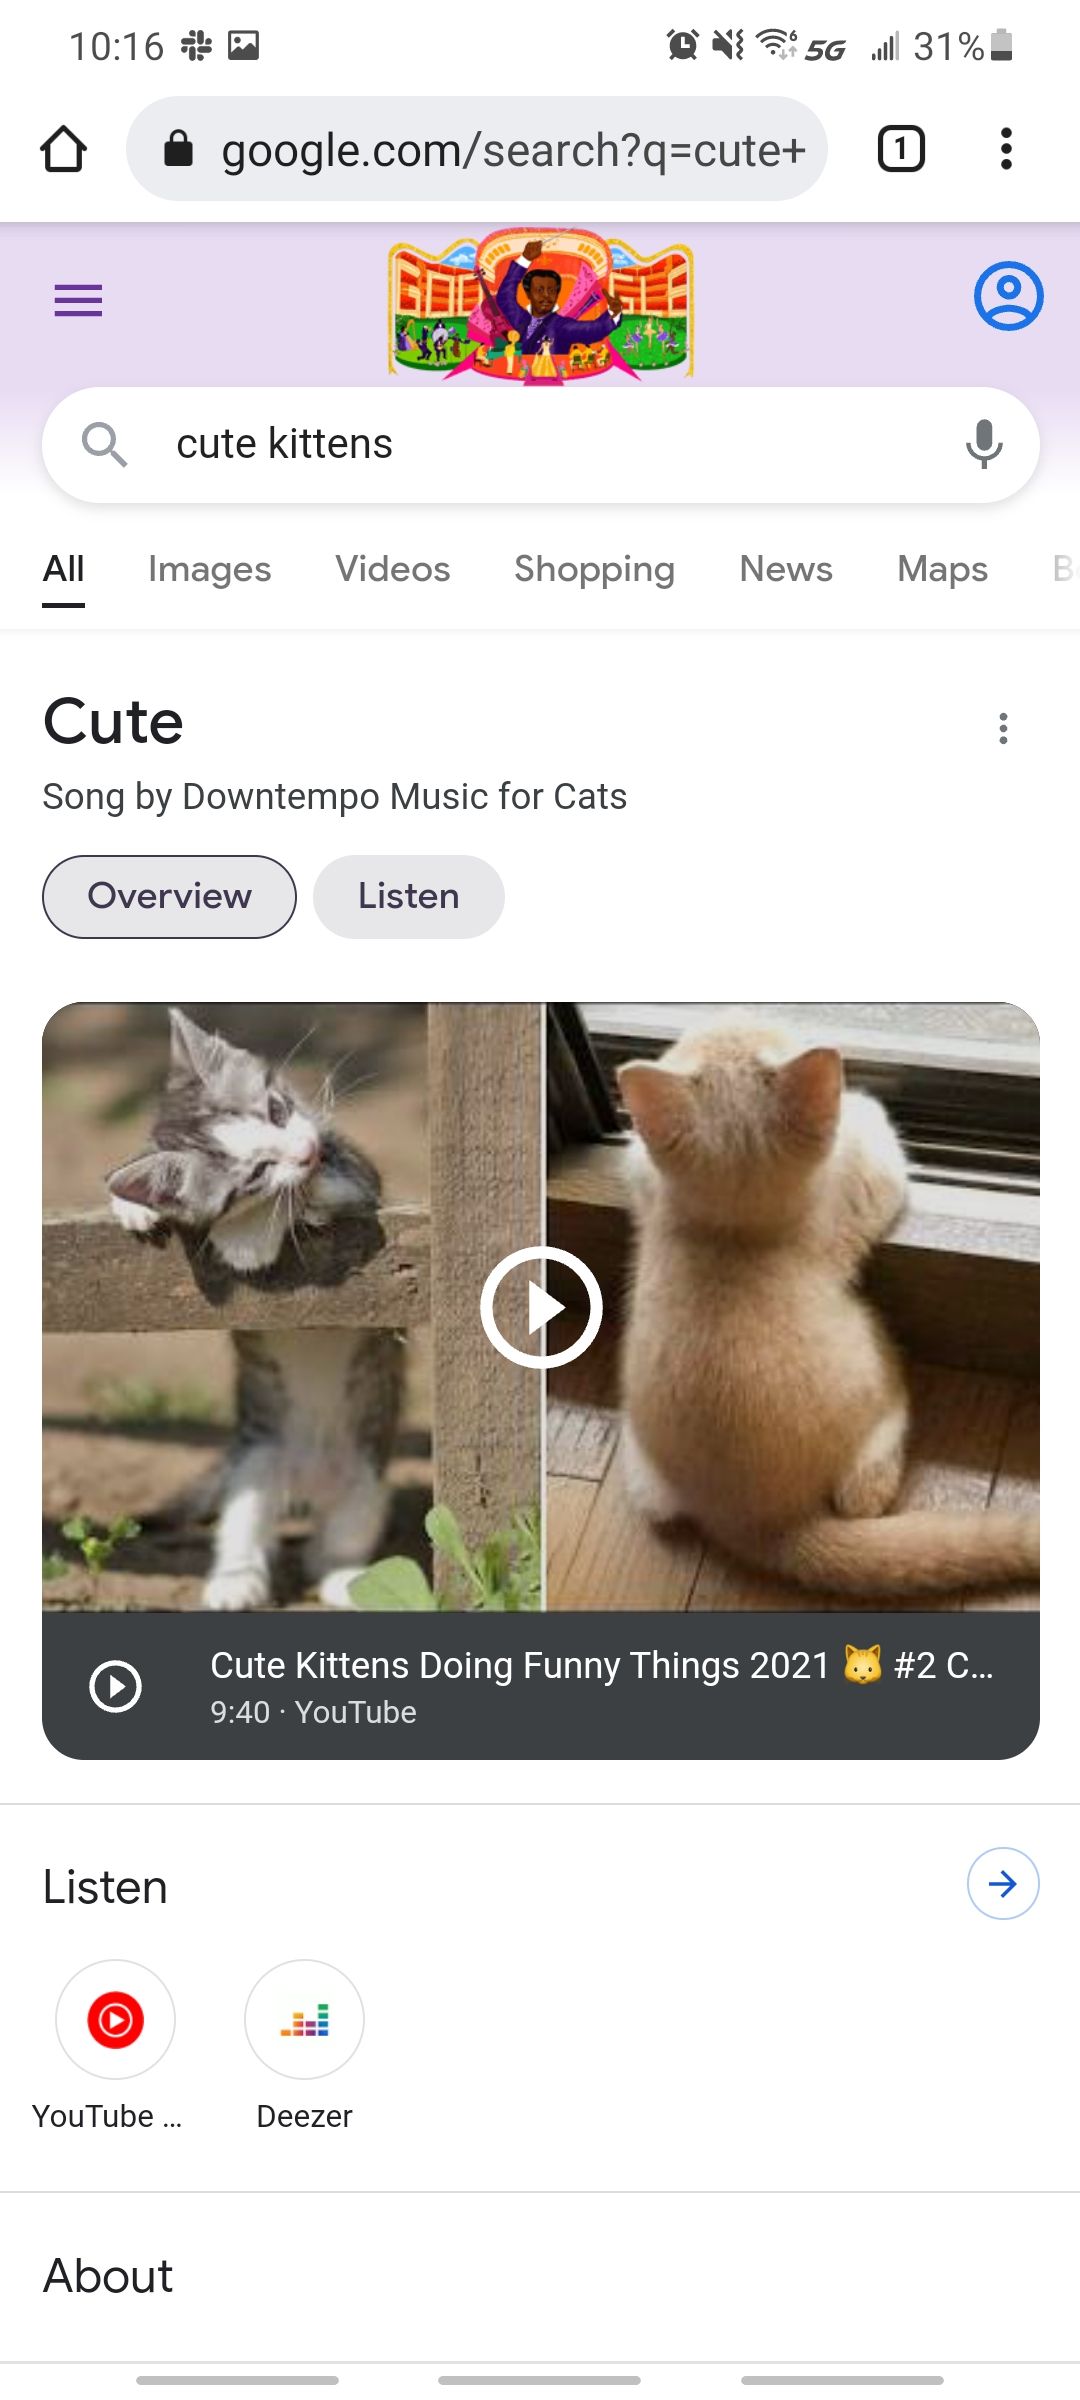 google chrome web search for cute kittens